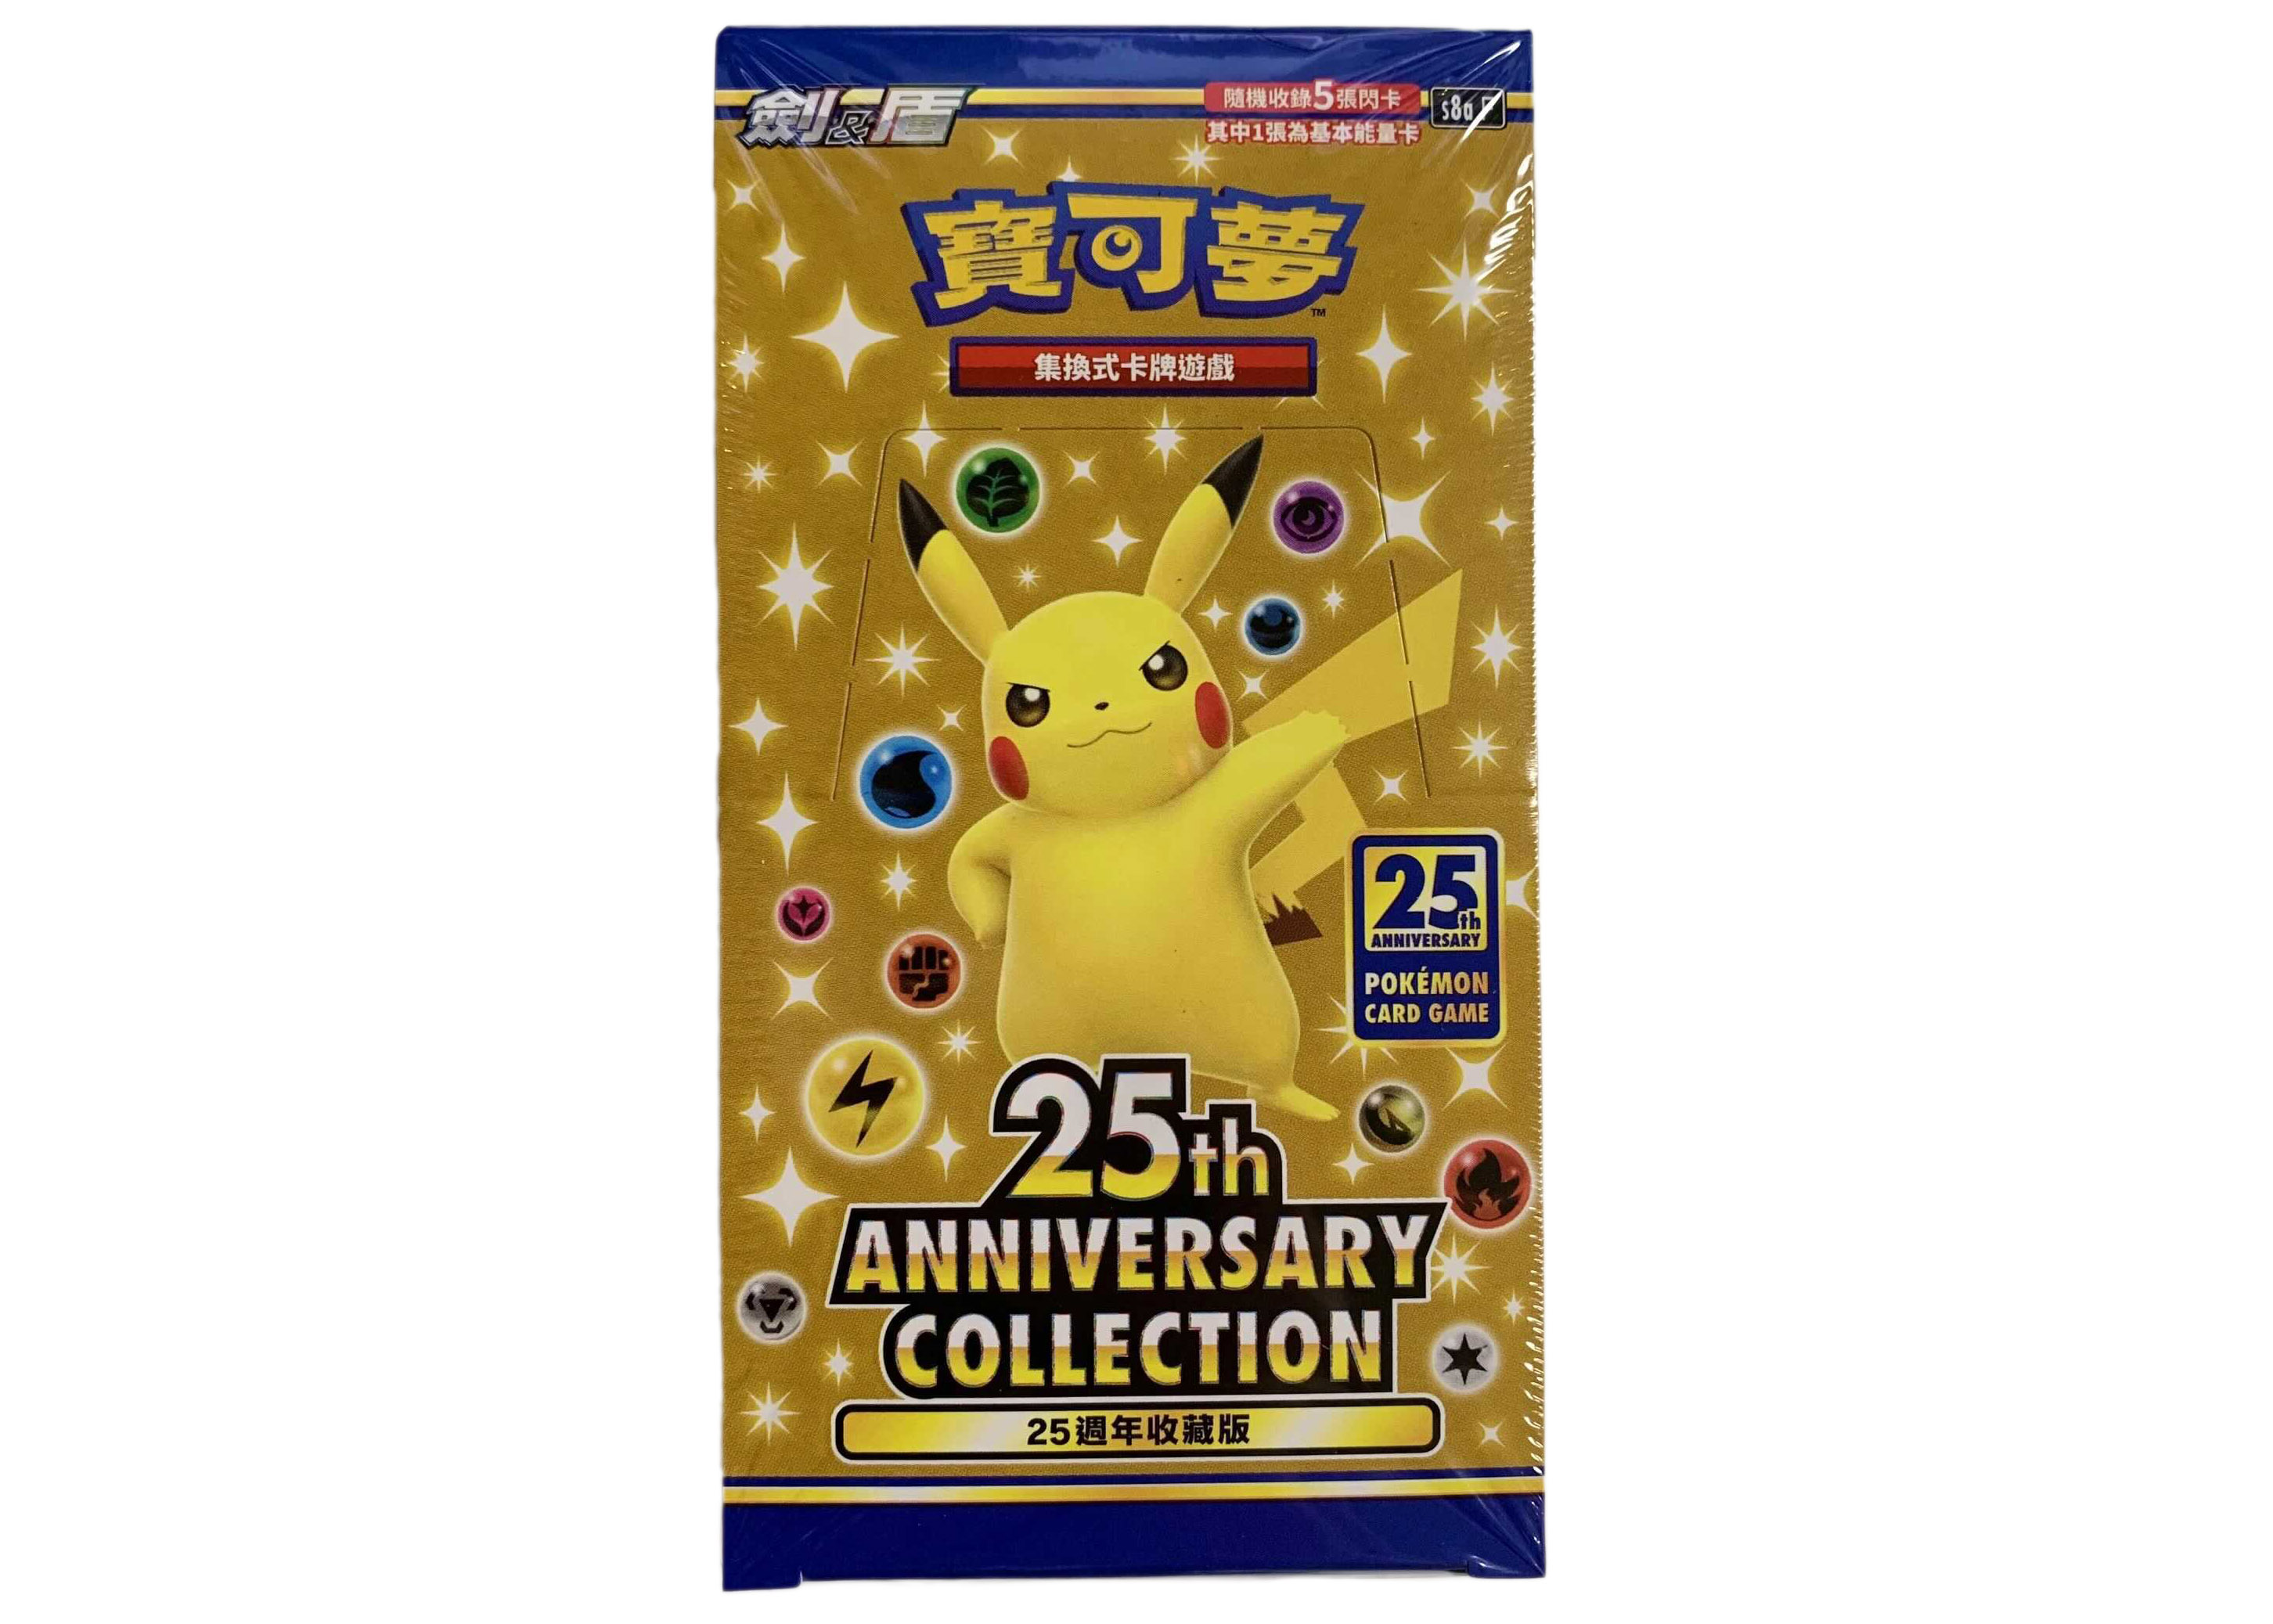 Pokémon TCG Sword & Shield 25th Anniversary Collection Special Set 